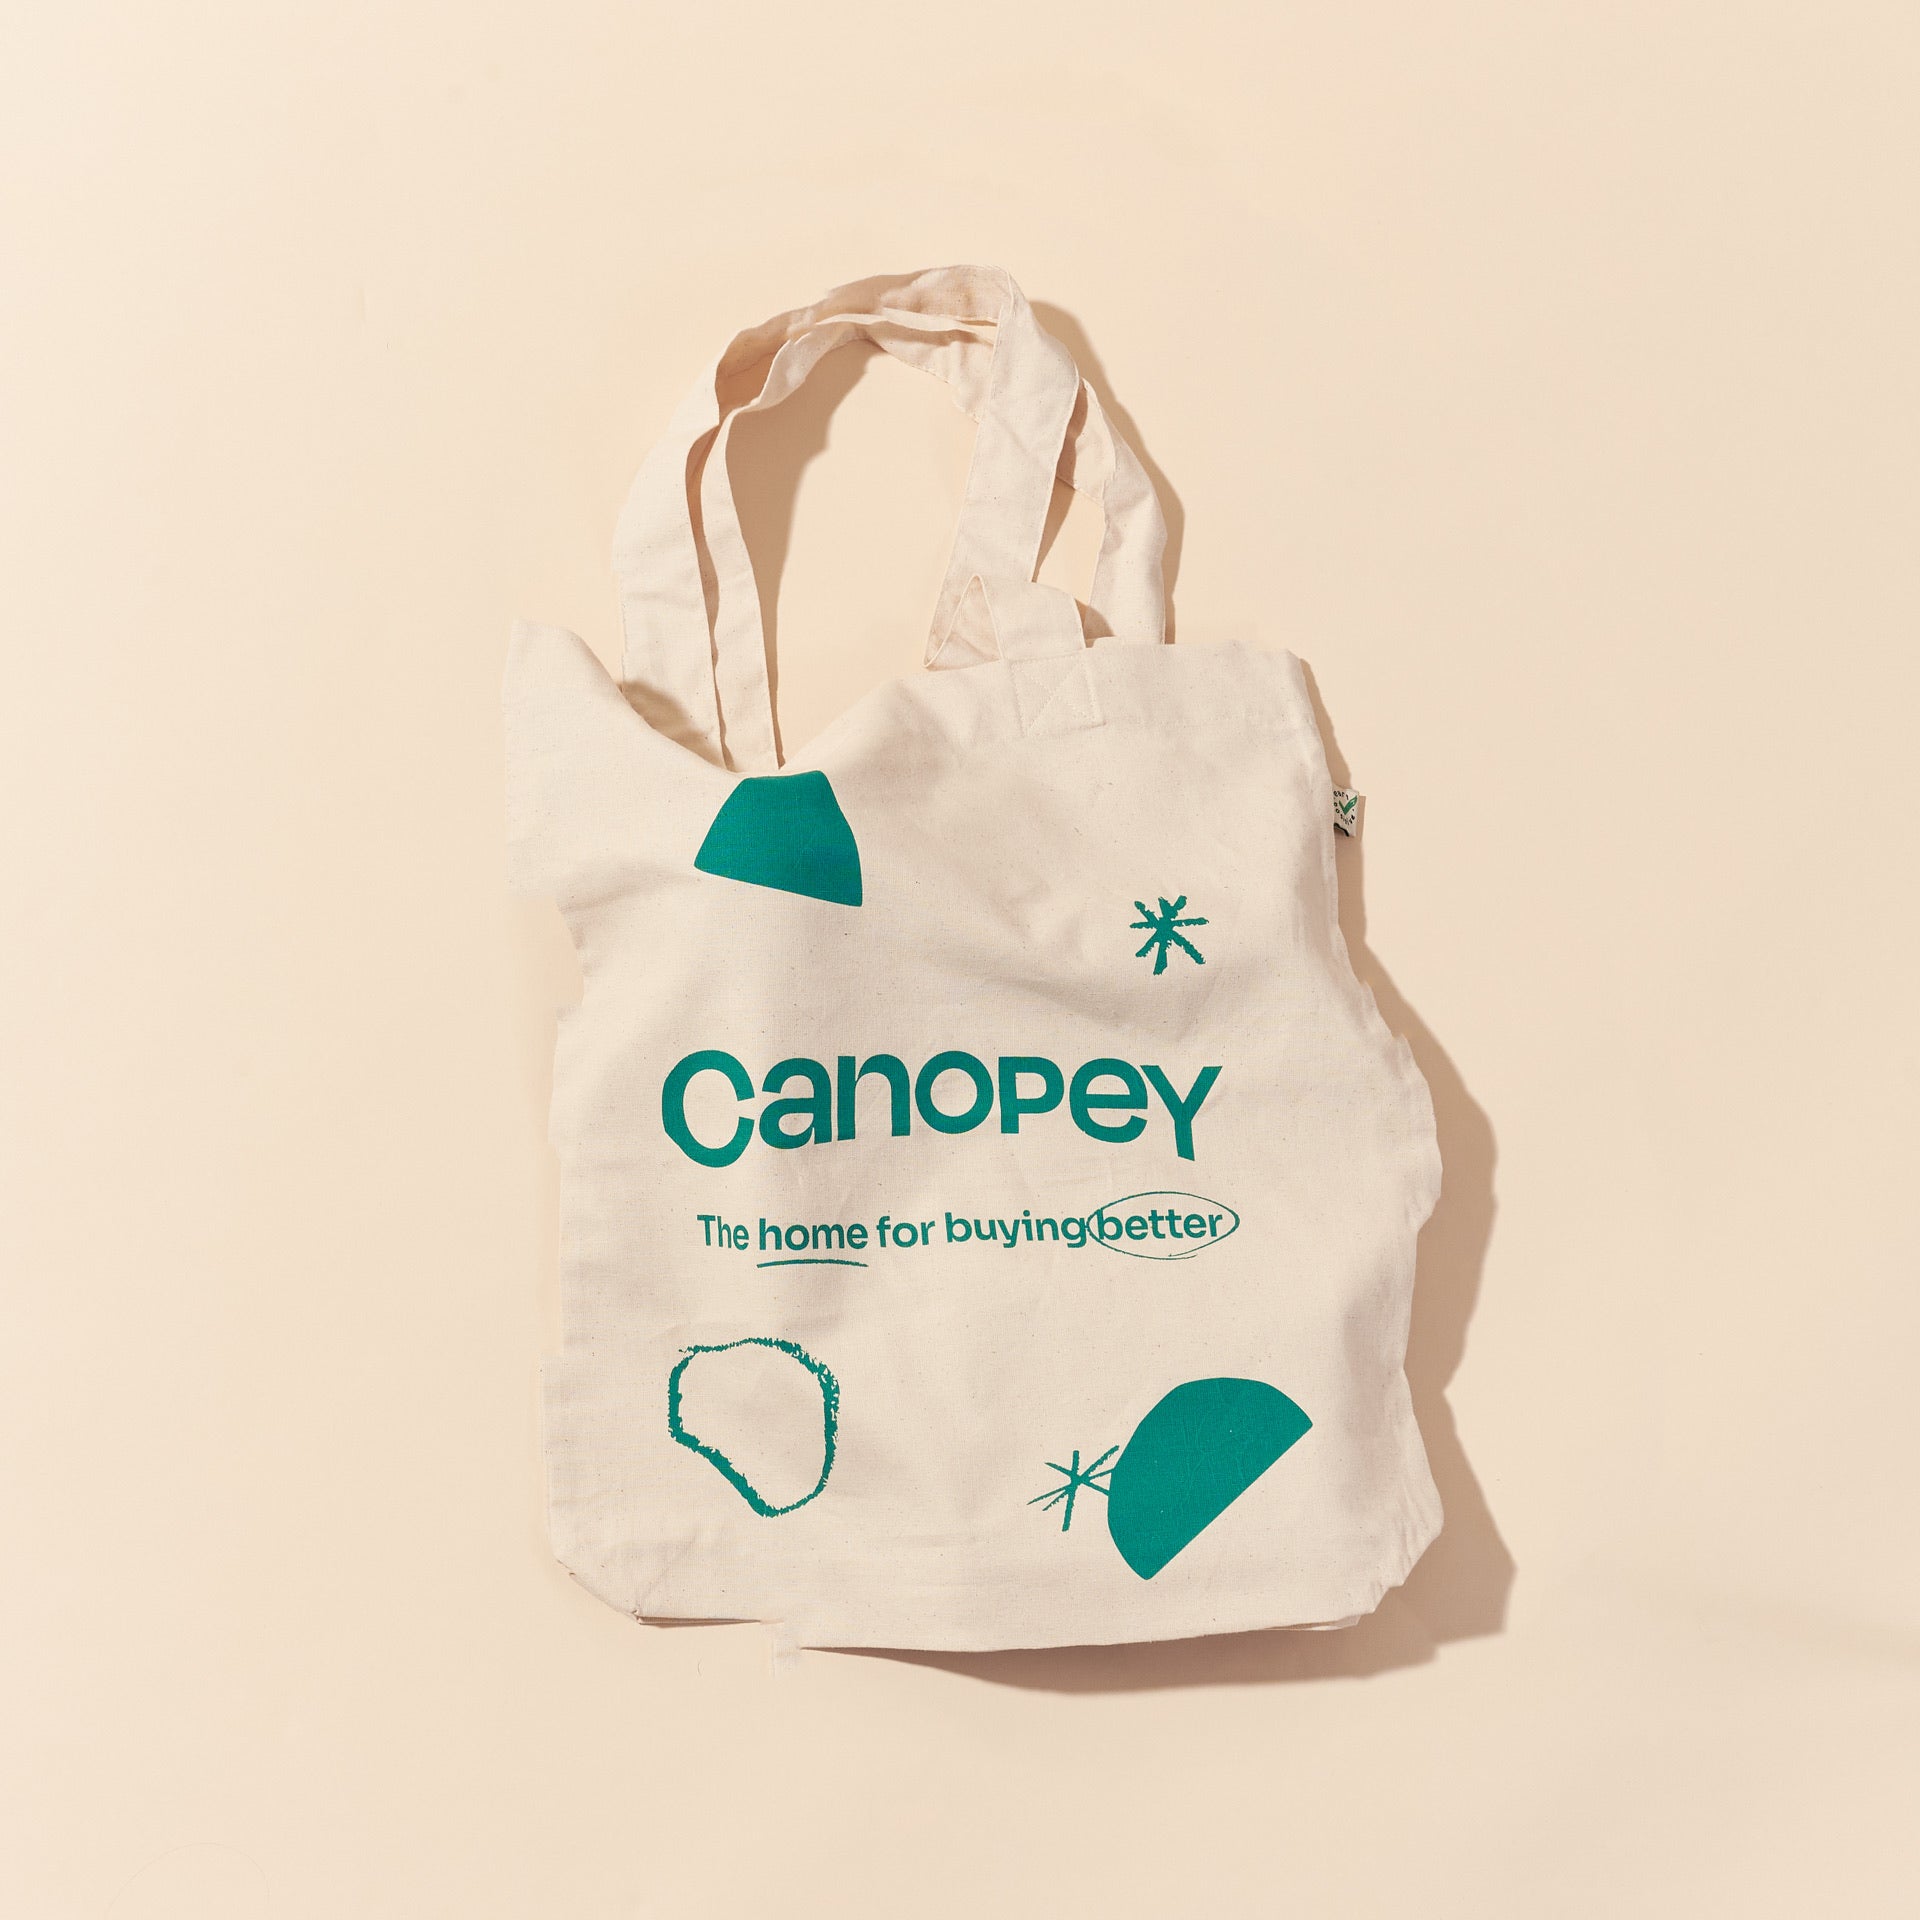 Product picture of Canopey Organic Tote Bag